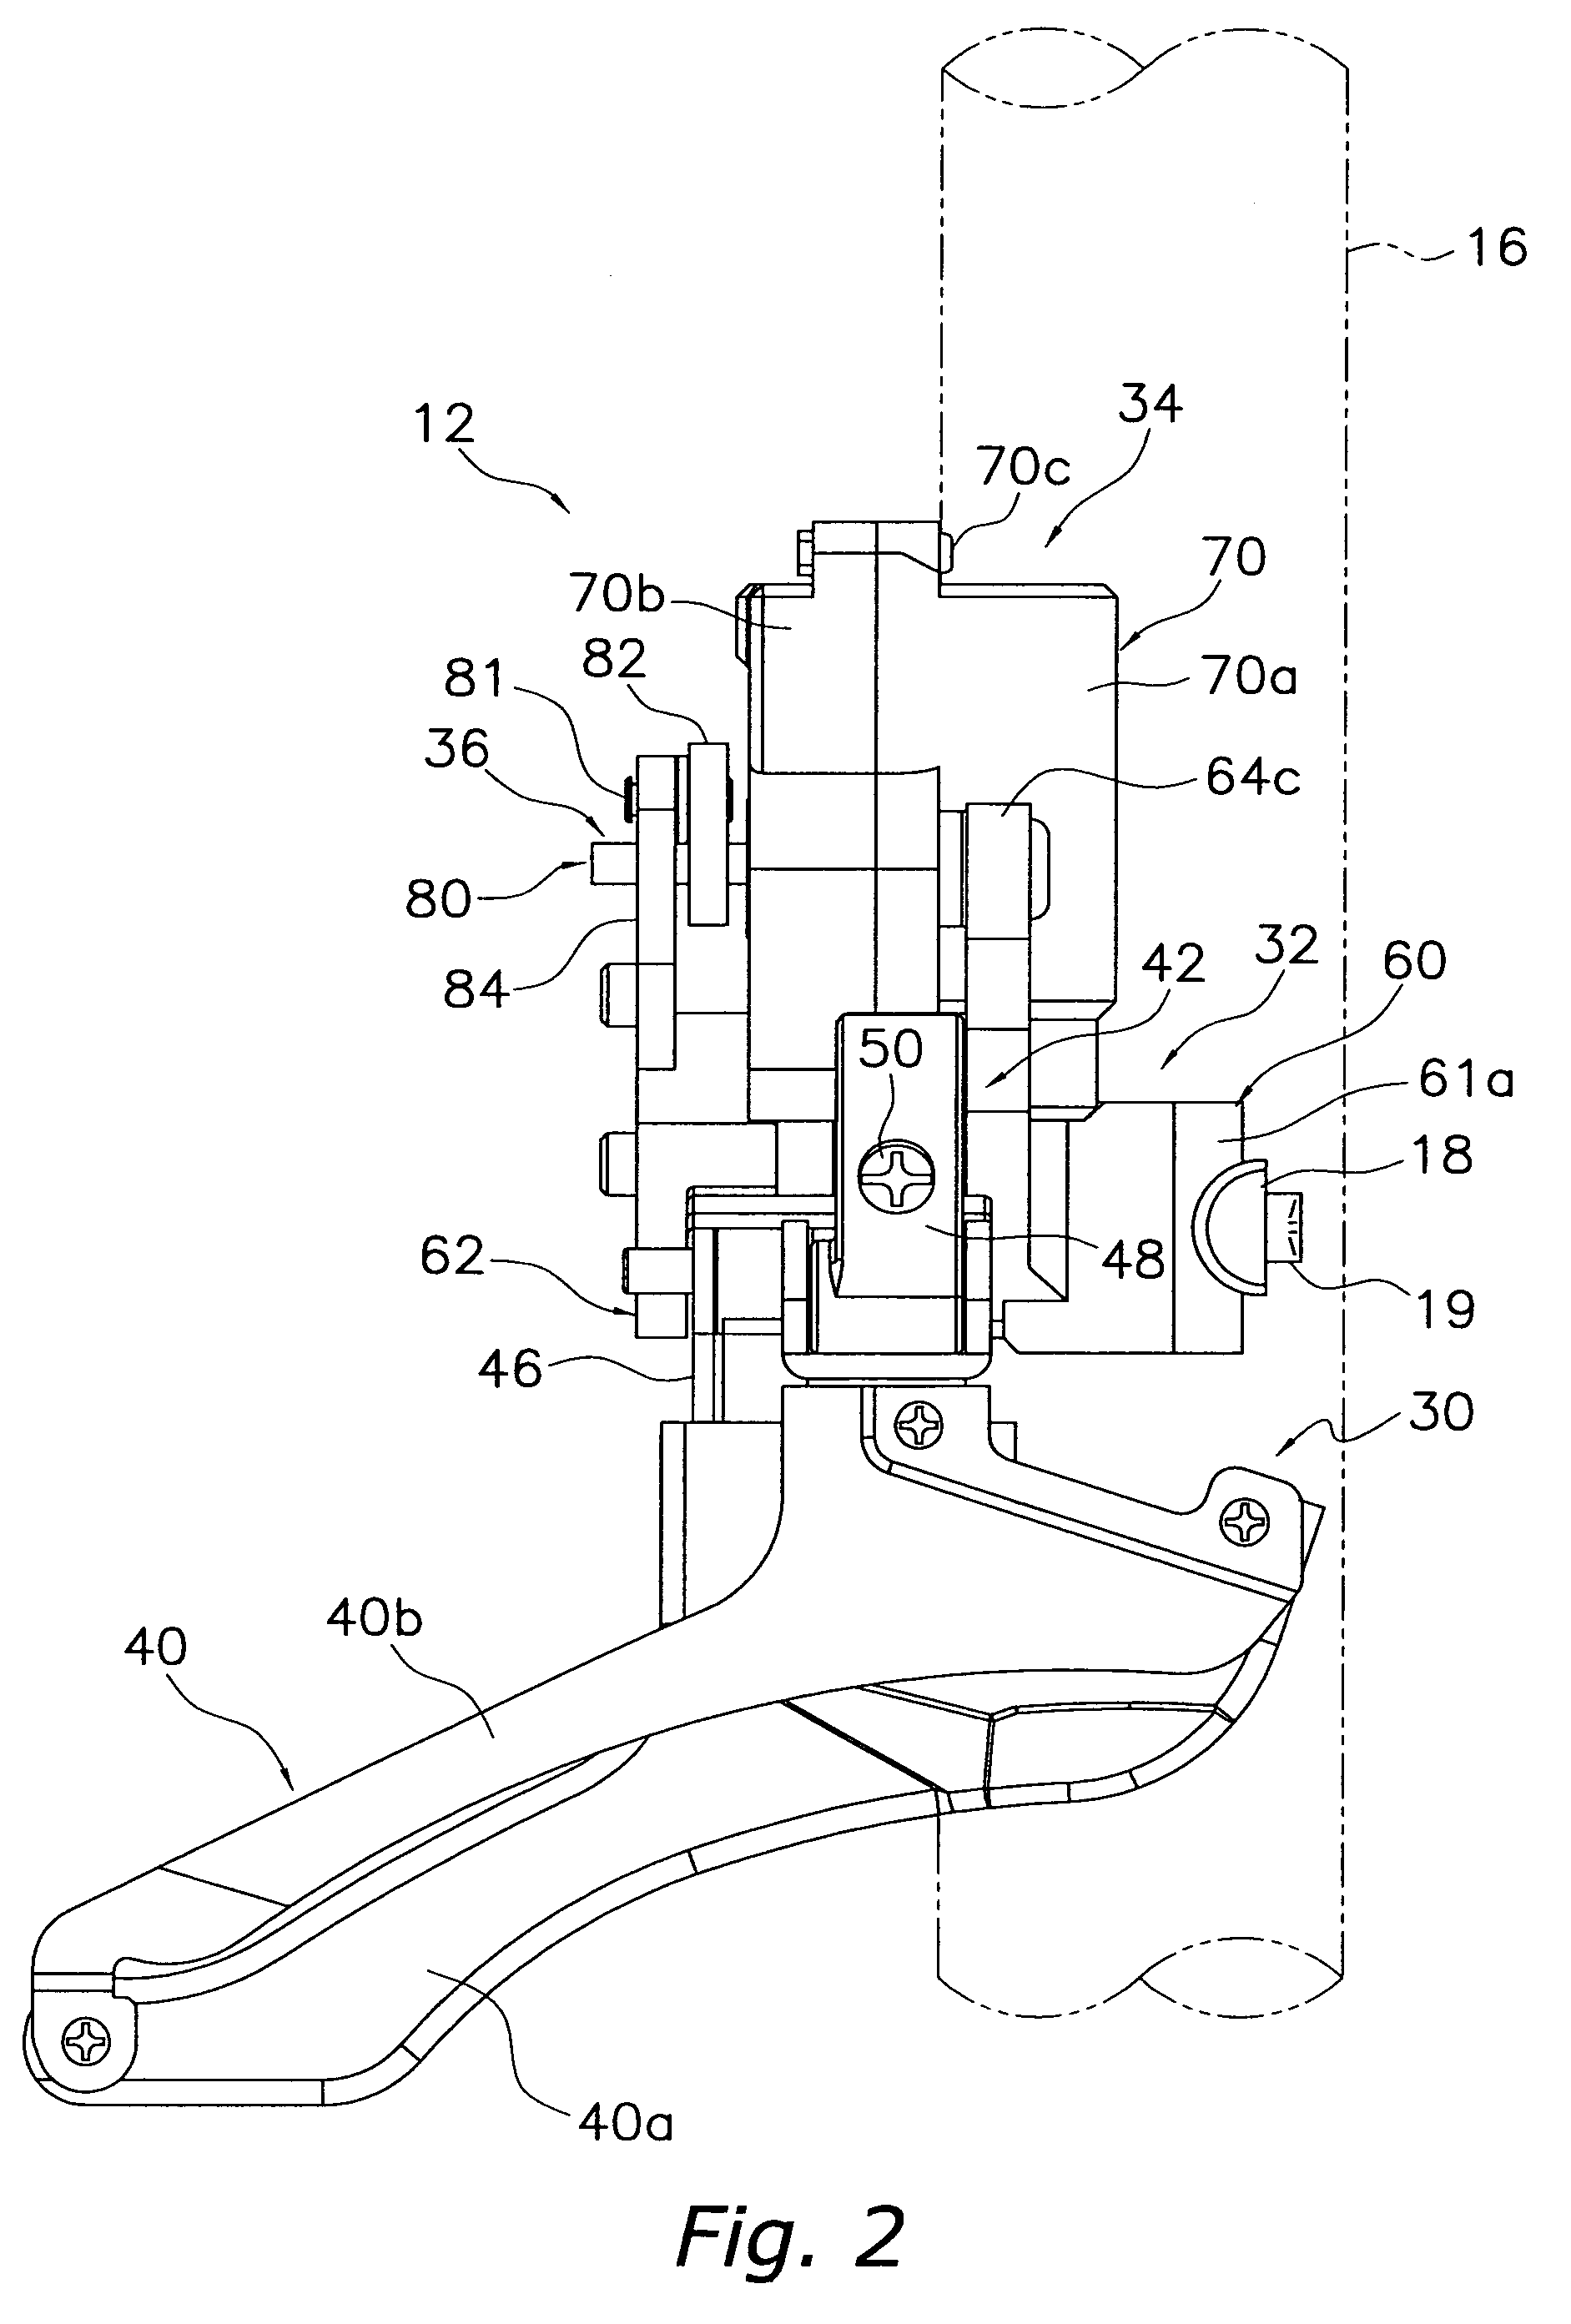 Motorized bicycle derailleur assembly